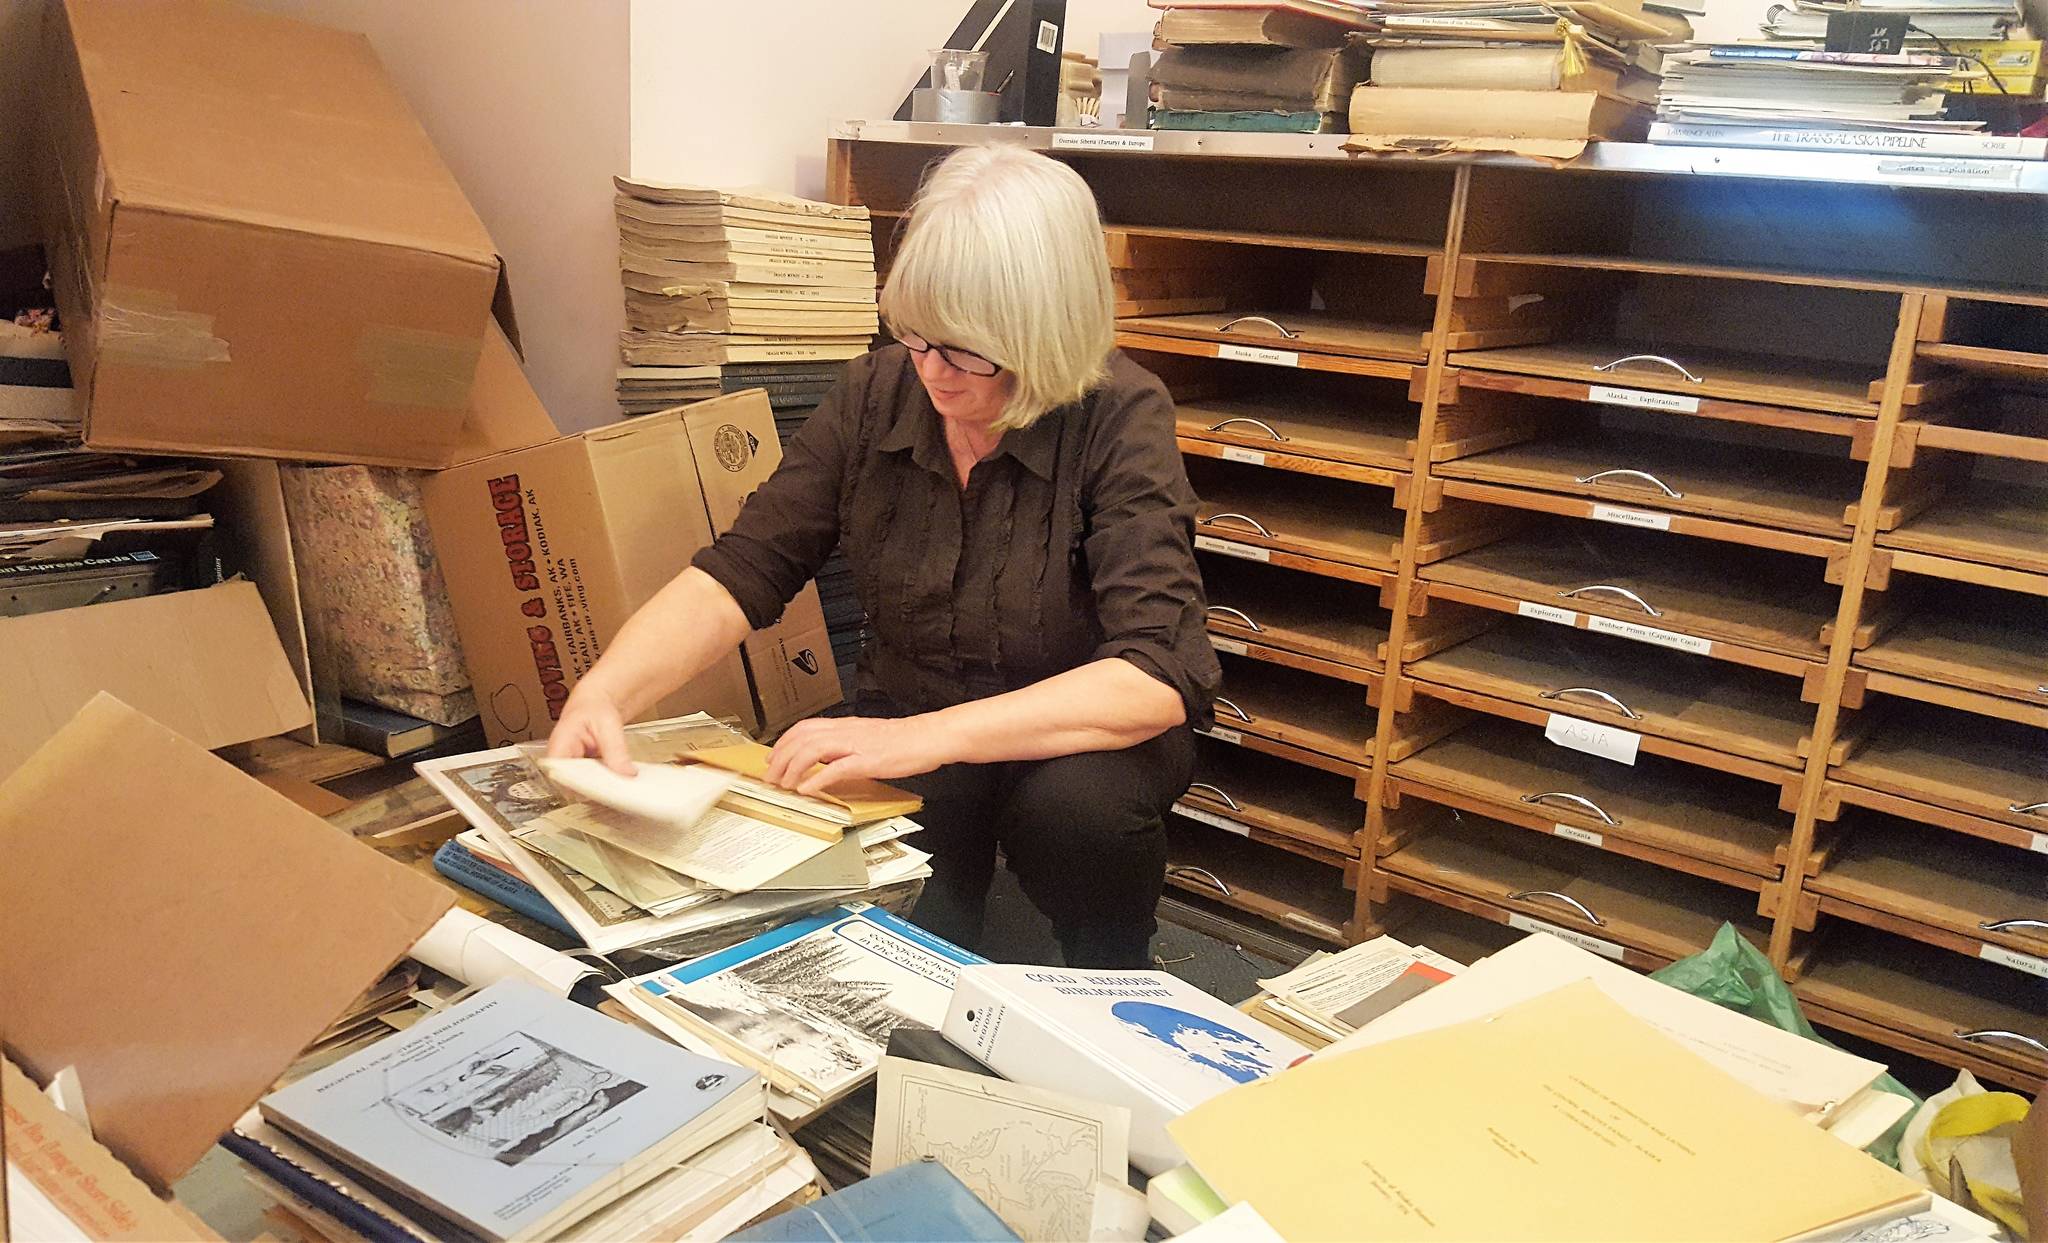 Patti David has spent 14 weeks sifting through the thousands of books, maps and ephemera in The Observatory bookstore as she helps the family dispose of the stock. (Liz Kellar | Juneau Empire)